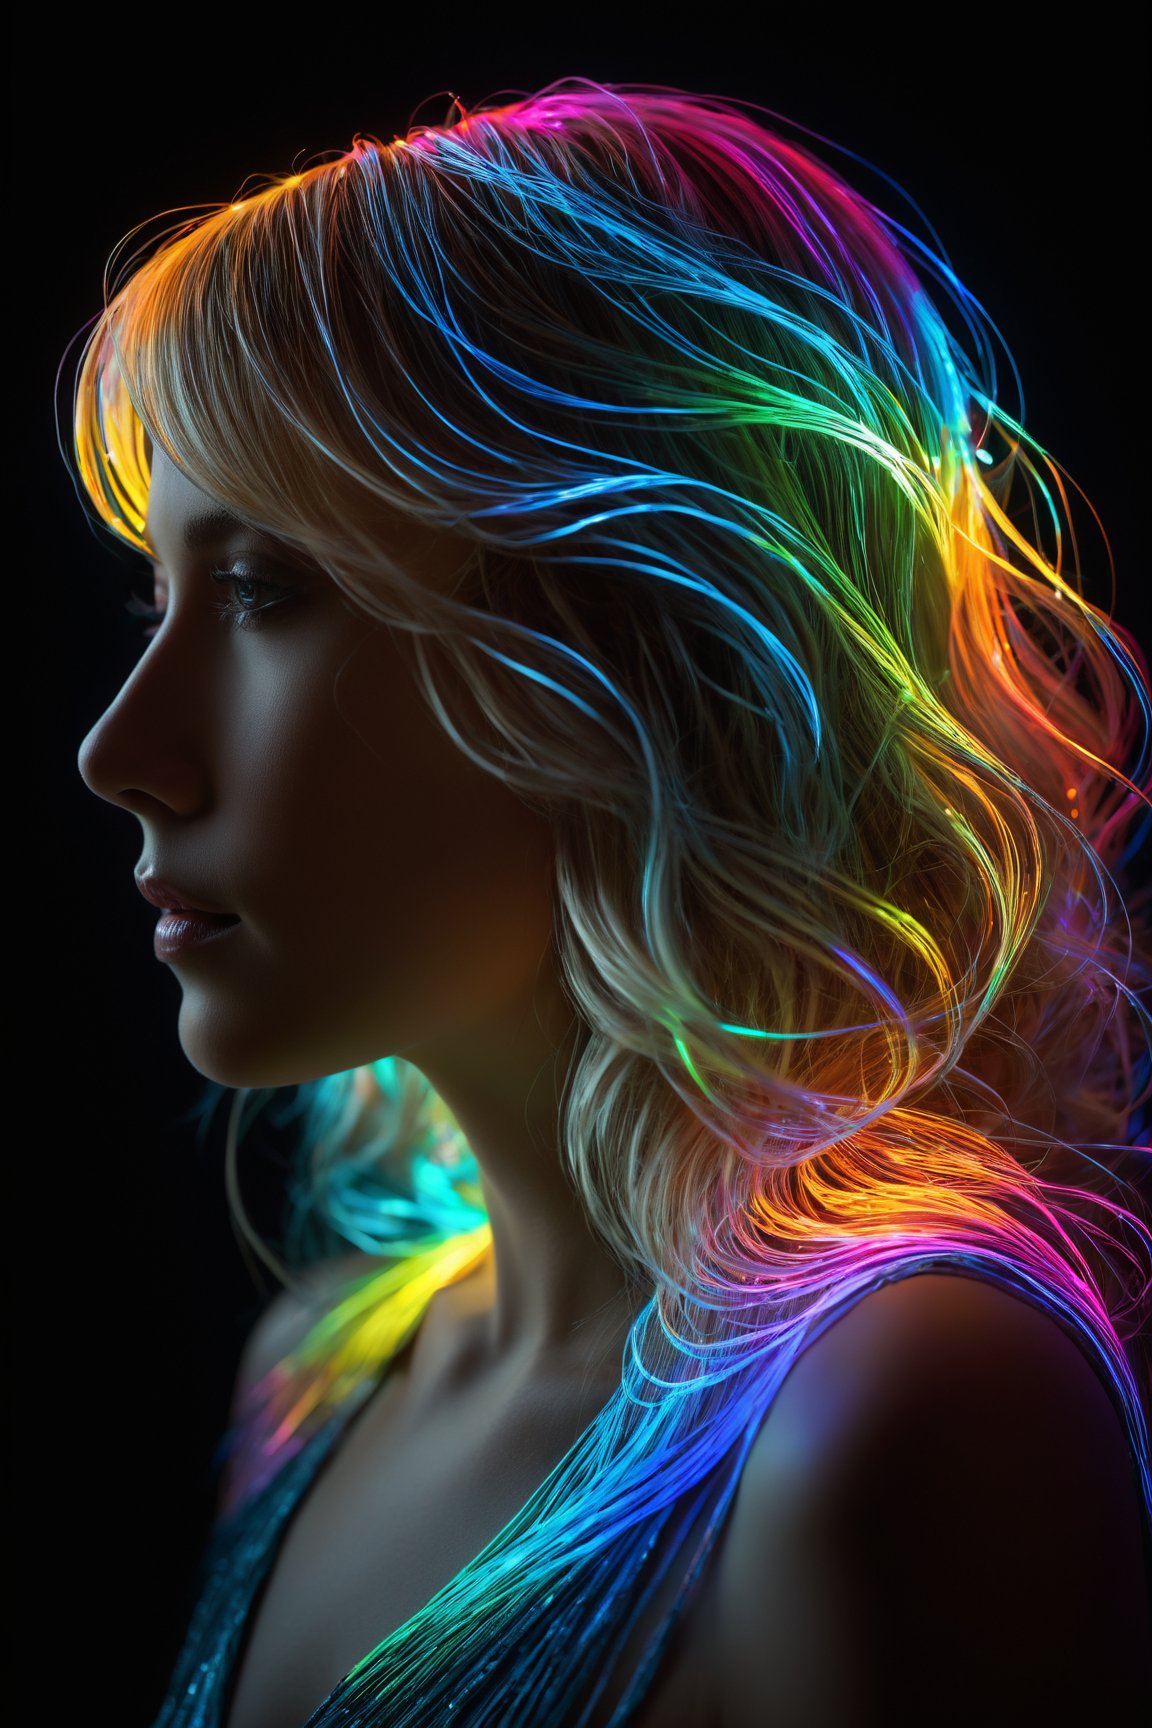 best quality, 4k, 8k, highres, masterpiece:1.2), ultra-detailed, (realistic, photorealistic, photo-realistic:1.37), Luminogram portrait with fiber optic light painting, Light field photography, Light painting, Light tracing, portraits, bokeh, studio lighting, physically-based rendering, vivid colors, sharp focus, reverse vignette, ethereal glow, colorful, delicate details, soft shadows, luminescent strands, subtle highlights, ambient incandescent light, fantastical atmosphere, glowing figures, unconventional light sources, contrasting hues, fiber optic brushstrokes, hypnotic patterns, trail of lights, playful illumination